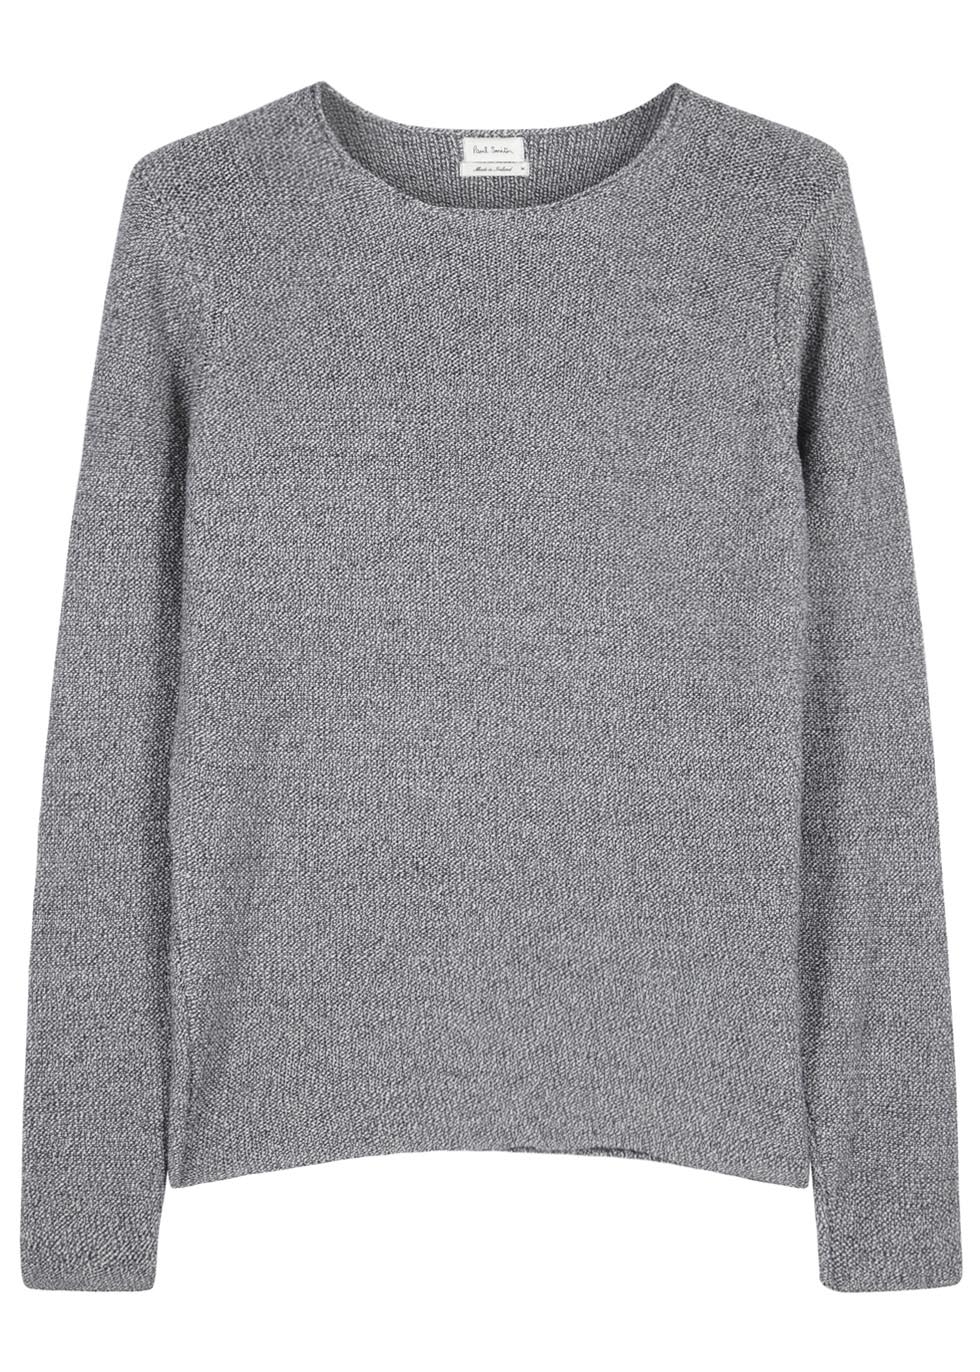 Grey knitted cotton jumper